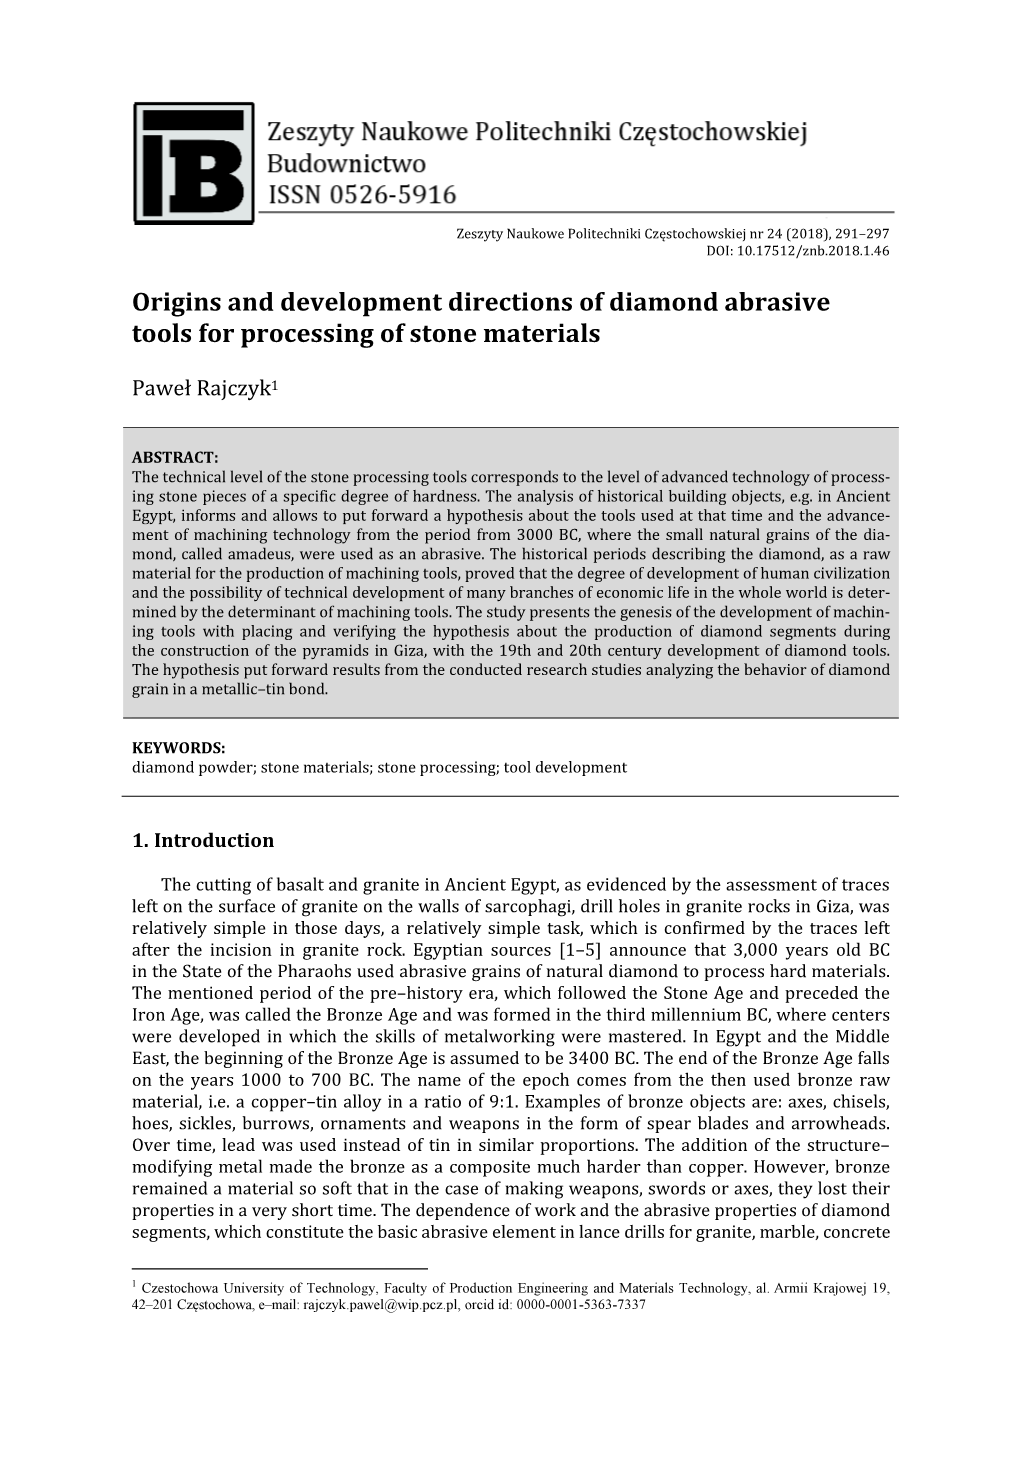 Origins and Development Directions of Diamond Abrasive Tools for Processing of Stone Materials